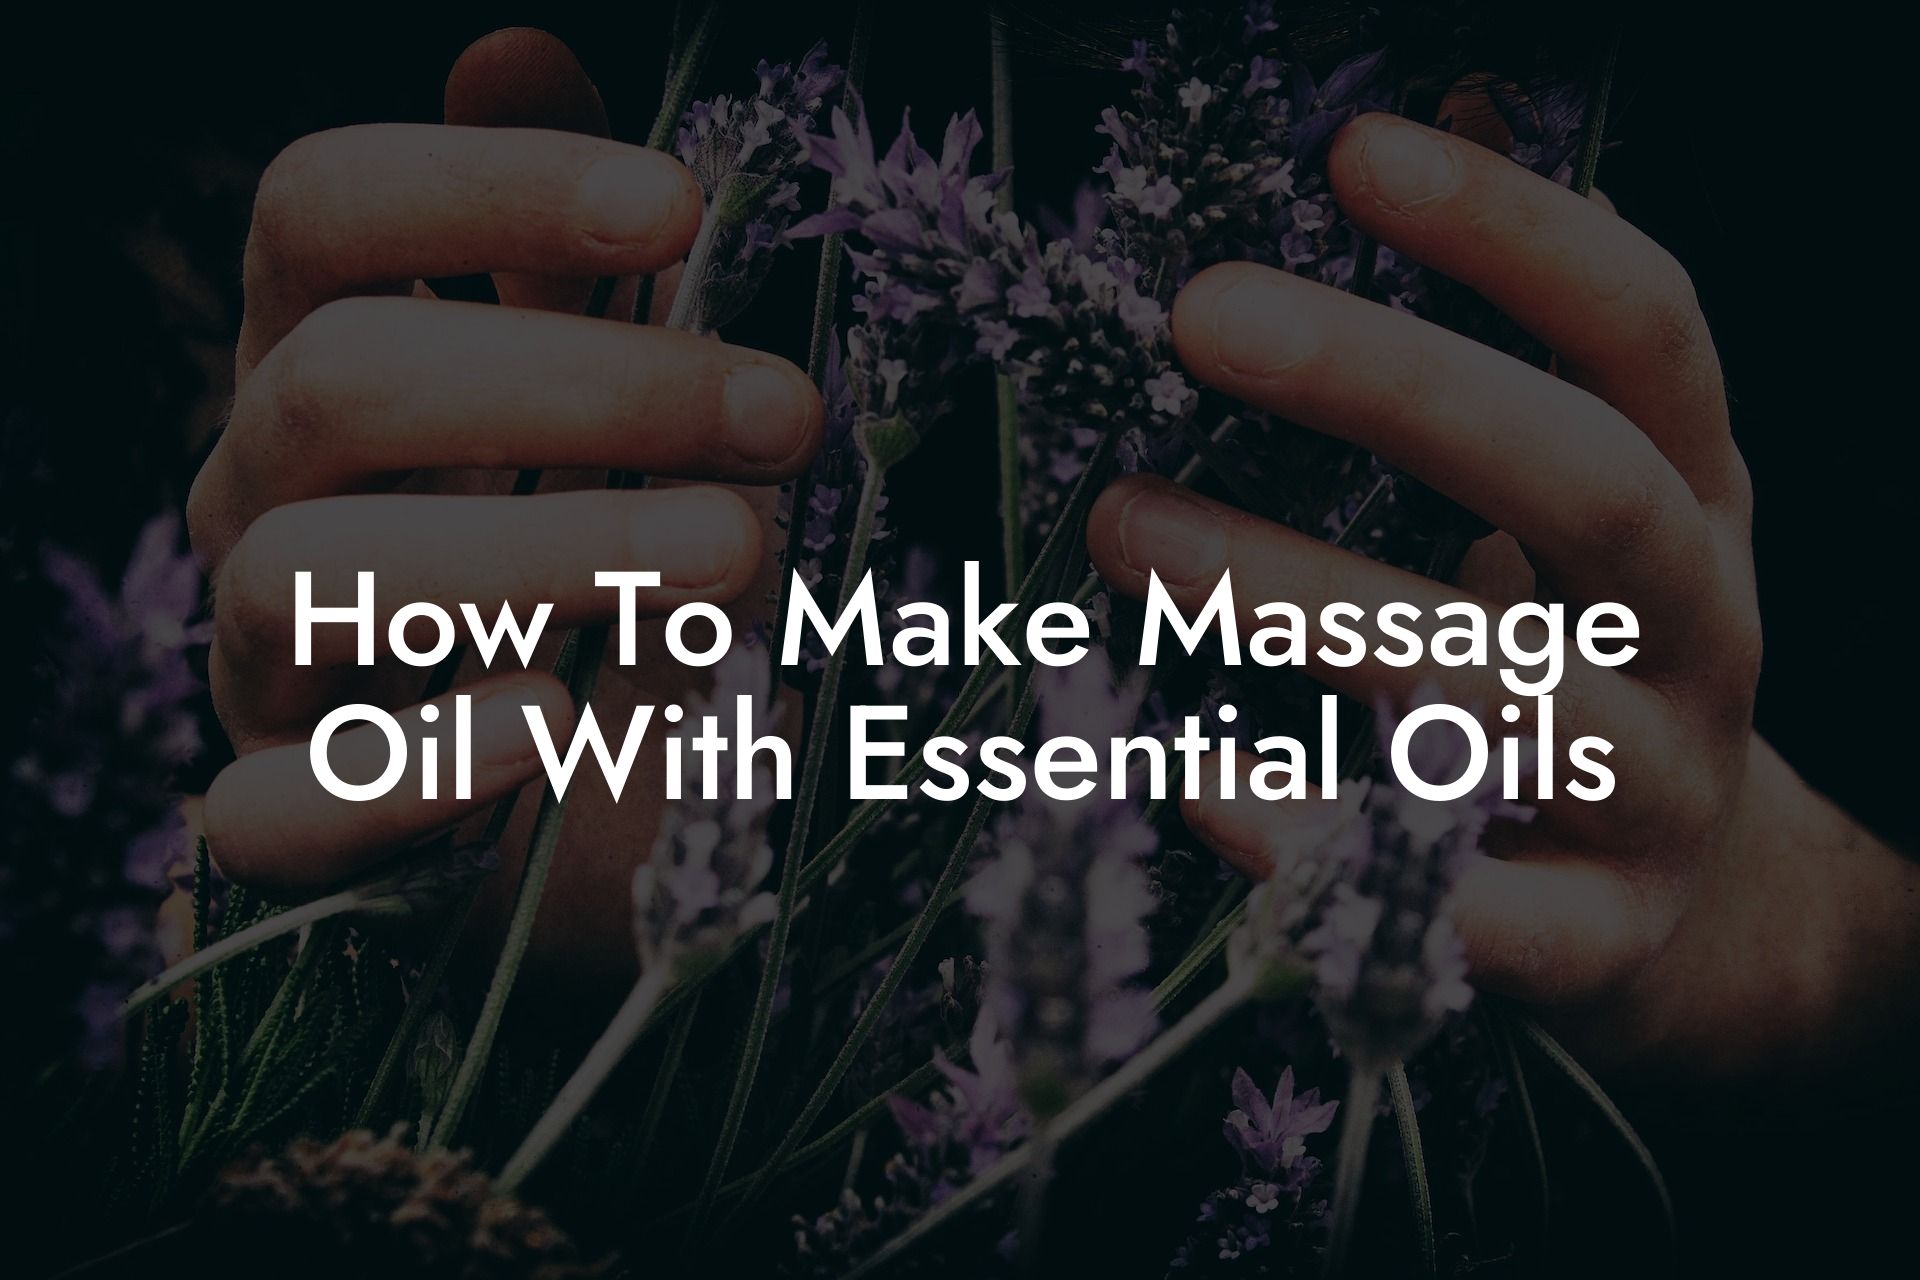 How To Make Massage Oil With Essential Oils